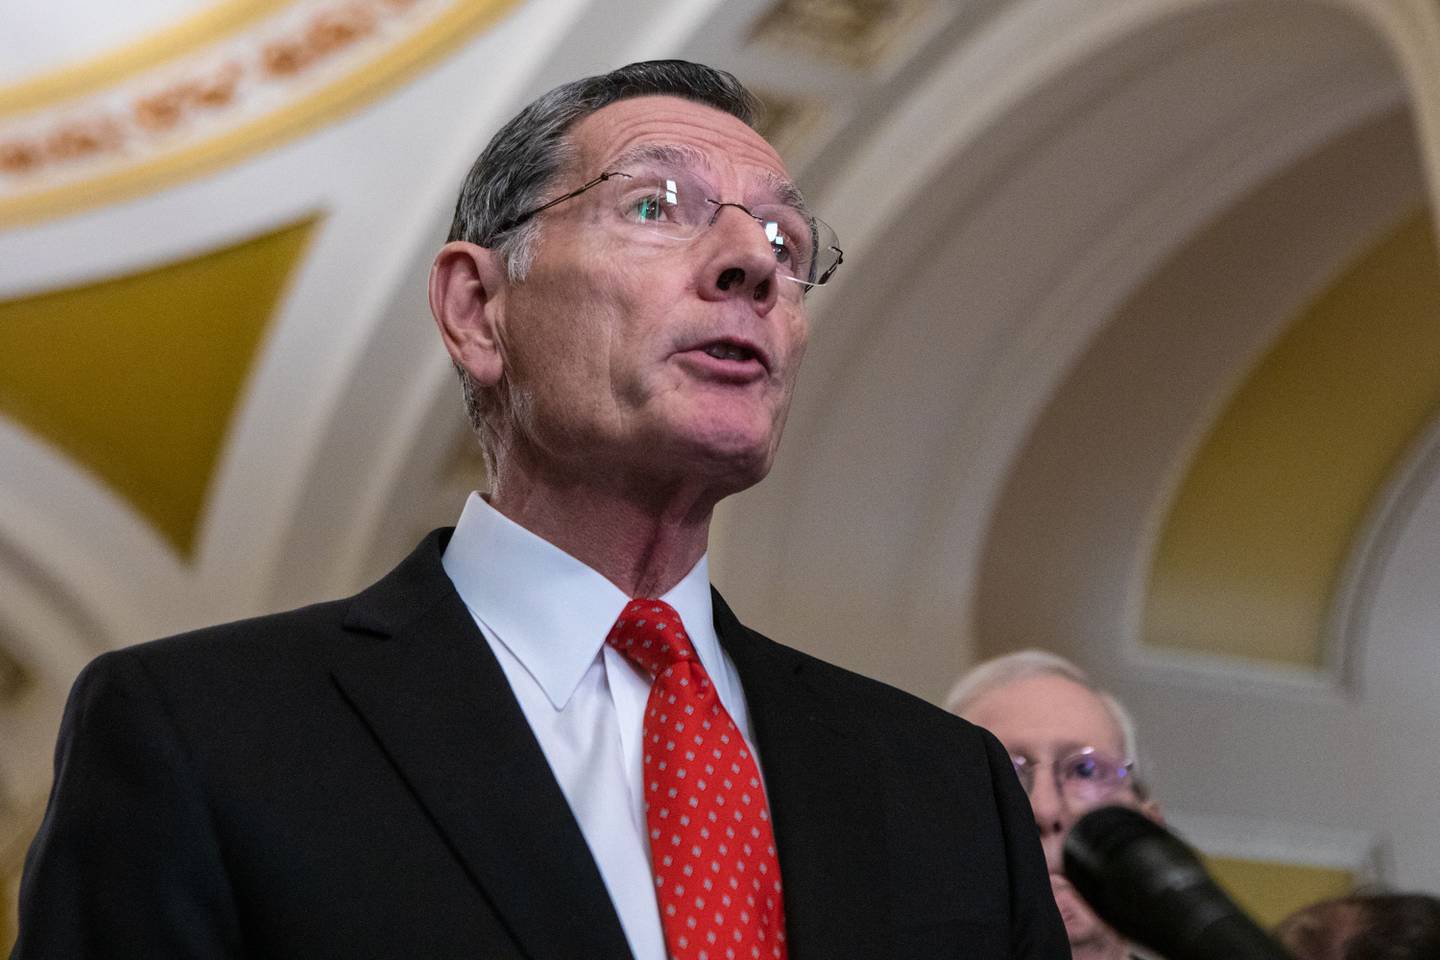 WASHINGTON, DC - NOVEMBER 14: Sen. John Barrasso (R-WY) speaks to reporters following the weekly Senate Republican caucus lunch at the U.S. Capitol on November 14, 2023 in Washington, DC. Congress is currently working to pass a resolution to avoid a government shutdown on November 17.   Anna Rose Layden/Getty Images/AFP (Photo by Anna Rose Layden / GETTY IMAGES NORTH AMERICA / Getty Images via AFP)